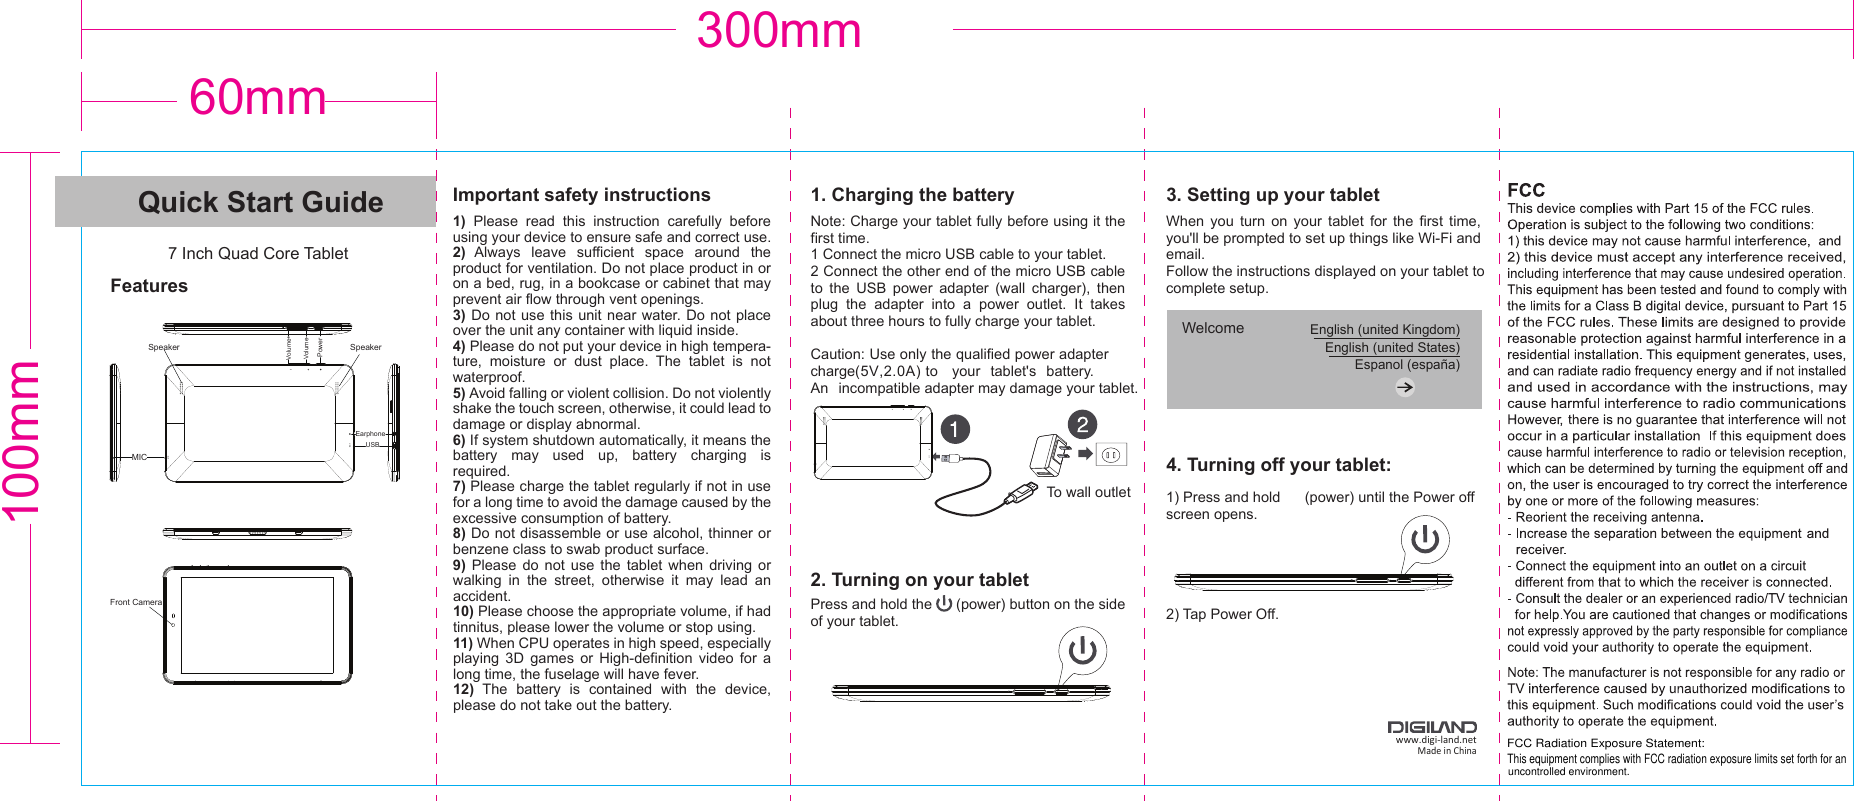 60mm300mm100mmQuick Start Guide7 Inch Quad Core TabletFeaturesImportant safety instructions1)  Please  read  this  instruction  carefully  before  using your device to ensure safe and correct use.2)  Always  leave  sufficient  space  around  the product for ventilation. Do not place product in or on a bed, rug, in a bookcase or cabinet that may prevent air flow through vent openings.3) Do  not use  this unit  near water. Do not place over the unit any container with liquid inside.4) Please do not put your device in high tempera-ture,  moisture  or  dust  place.  The  tablet  is  not waterproof.5) Avoid falling or violent collision. Do not violently shake the touch screen, otherwise, it could lead to damage or display abnormal.6) If system shutdown automatically, it means the battery  may  used  up,  battery  charging  is      required.7) Please charge the tablet regularly if not in use for a long time to avoid the damage caused by the excessive consumption of battery.8) Do not disassemble or use alcohol, thinner or benzene class to swab product surface.9)  Please  do  not  use  the  tablet  when  driving  or walking  in  the  street,  otherwise  it  may  lead  an accident.10) Please choose the appropriate volume, if had tinnitus, please lower the volume or stop using.11) When CPU operates in high speed, especially playing  3D  games  or  High-definition  video  for  a long time, the fuselage will have fever.12)  The  battery  is  contained  with  the  device, please do not take out the battery.1. Charging the batteryNote: Charge your tablet fully before using it the first time.1 Connect the micro USB cable to your tablet.2 Connect the other end of the micro USB cable to  the  USB  power  adapter  (wall  charger),  then plug  the  adapter  into  a  power  outlet.  It  takes about three hours to fully charge your tablet.Caution: Use only the qualified power adaptercharge(5V,2.0A) to   your  tablet&apos;s  battery. An  incompatible adapter may damage your tablet.When  you  turn  on  your  tablet  for  the  first  time, you&apos;ll be prompted to set up things like Wi-Fi and email. Follow the instructions displayed on your tablet to complete setup.1) Press and hold      (power) until the Power offscreen opens.2) Tap Power Off.Press and hold the      (power) button on the side of your tablet.To wall outlet2. Turning on your tabletWelcome  English (united Kingdom)English (united States)Espanol (españa)3. Setting up your tablet4. Turning off your tablet:www.digi-land.netMade in ChinaUSBMICFront CameraEarphonePowerVolume+Volume-Speaker SpeakerMICUSBMICUSB FCC Radiation Exposure Statement:This equipment complies with FCC radiation exposure limits set forth for an uncontrolled environment.